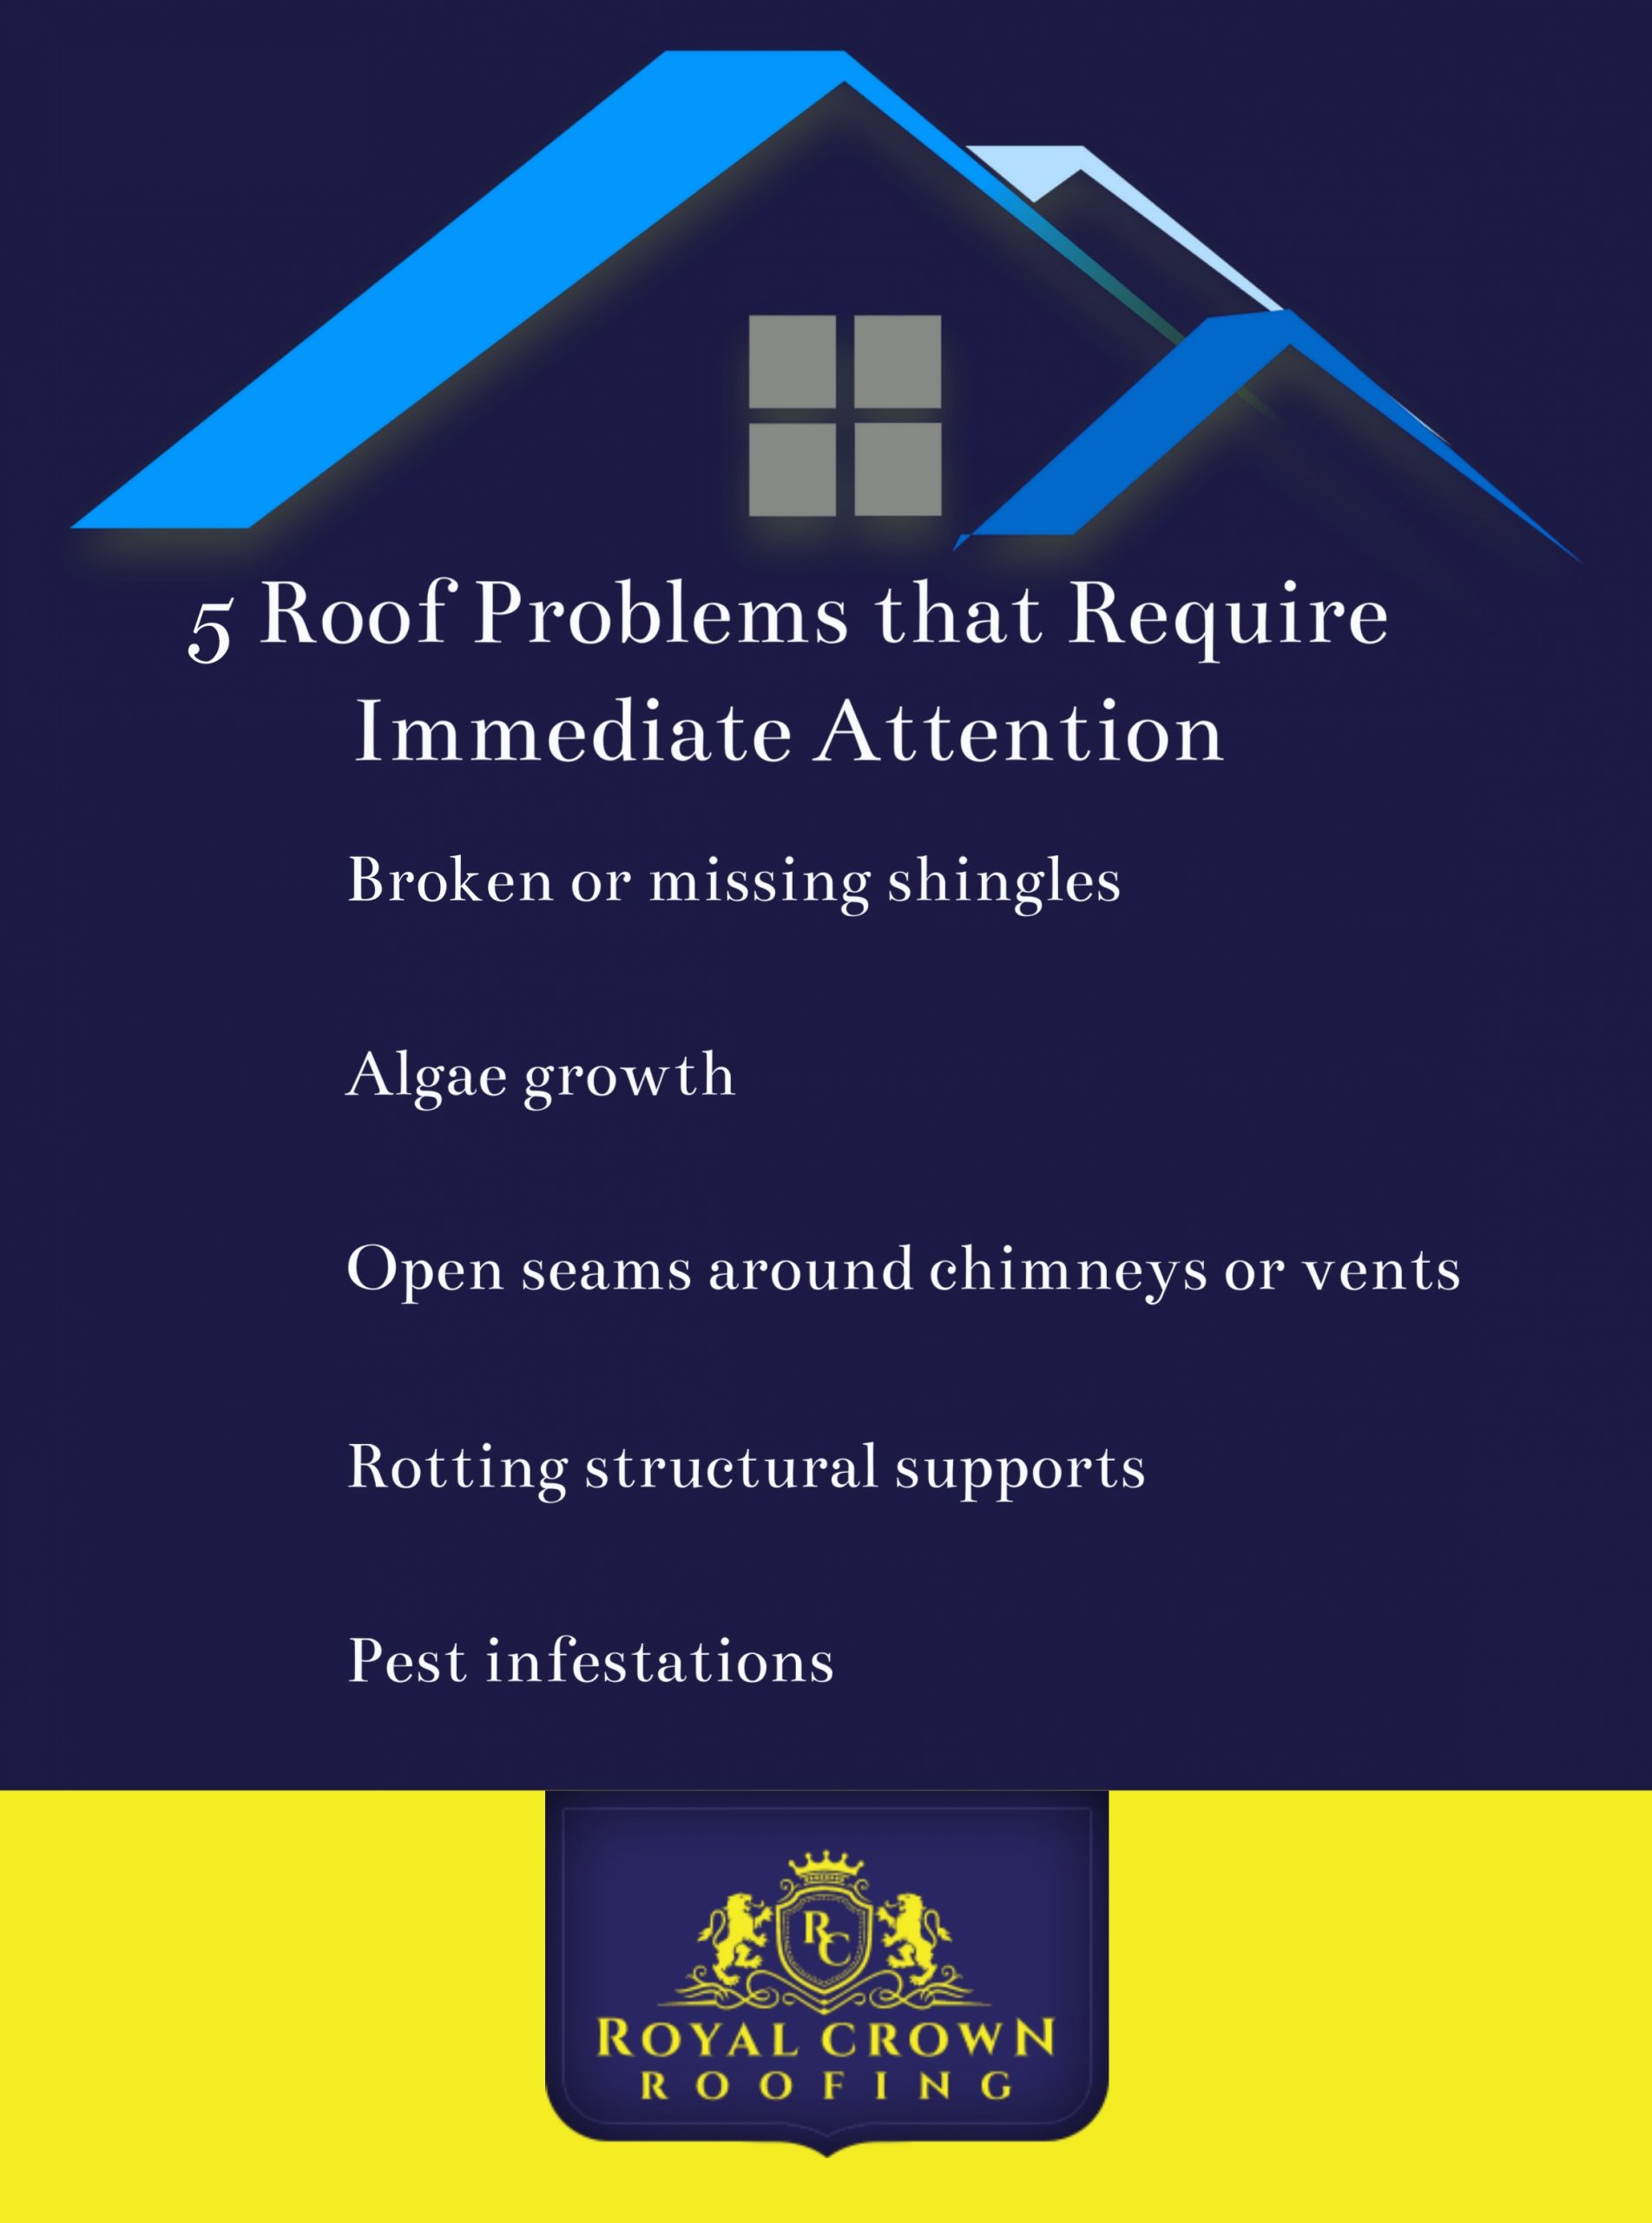 5 Roof Problems that Require Immediate Attention, Royal Crown Roofing, Conroe, TX